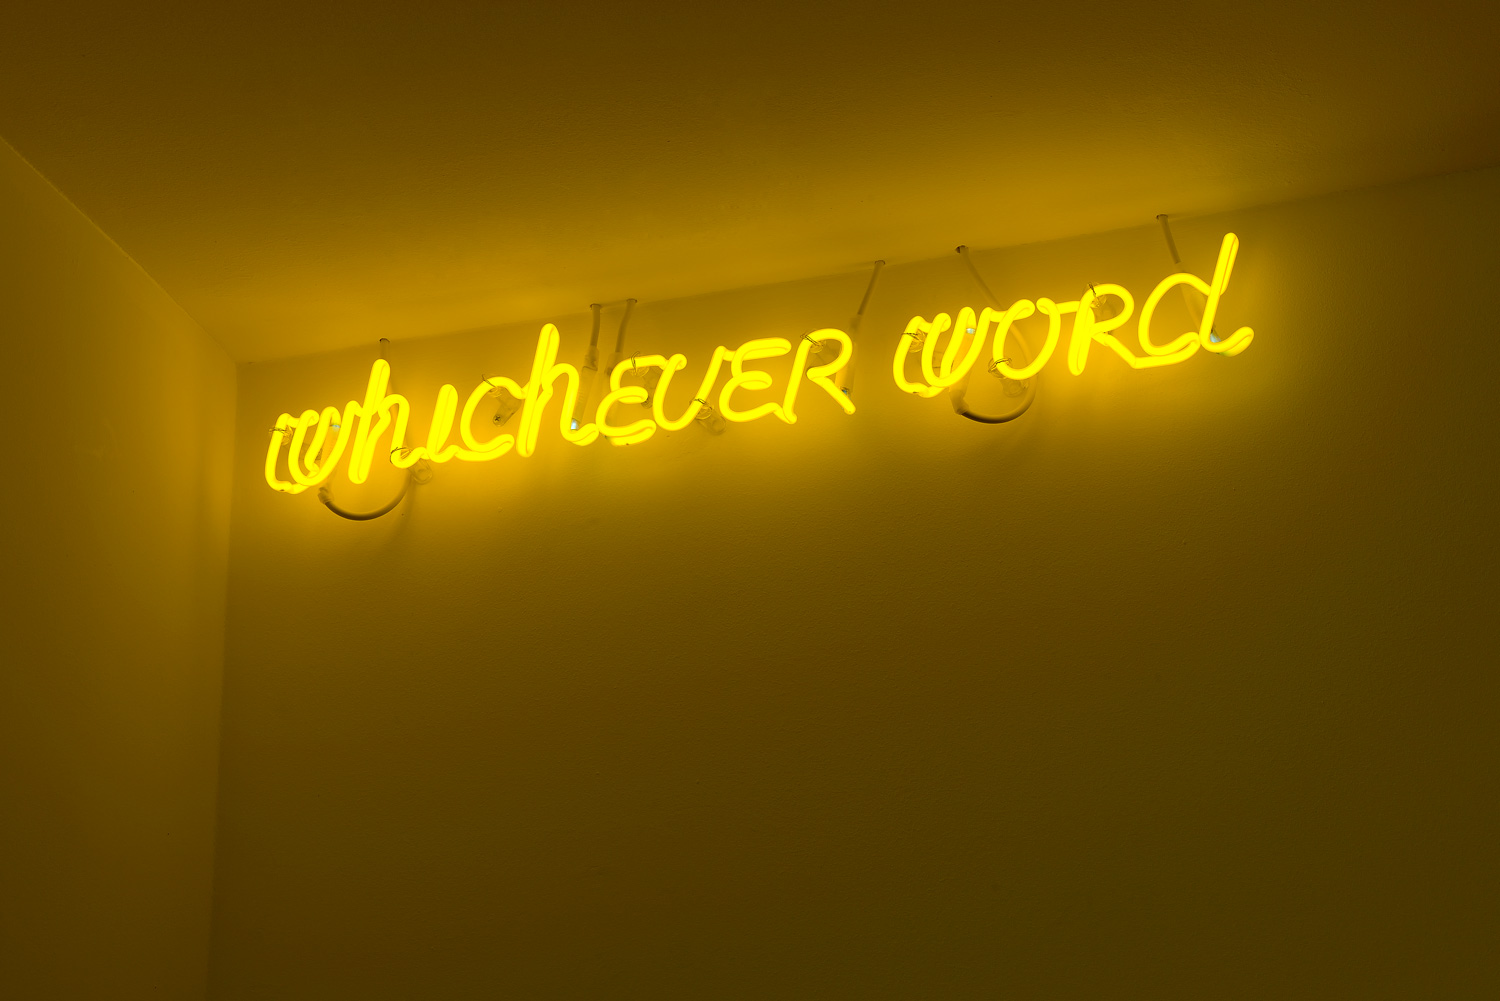 whichever word, 2012 - Vue suppl&eacute;mentaire